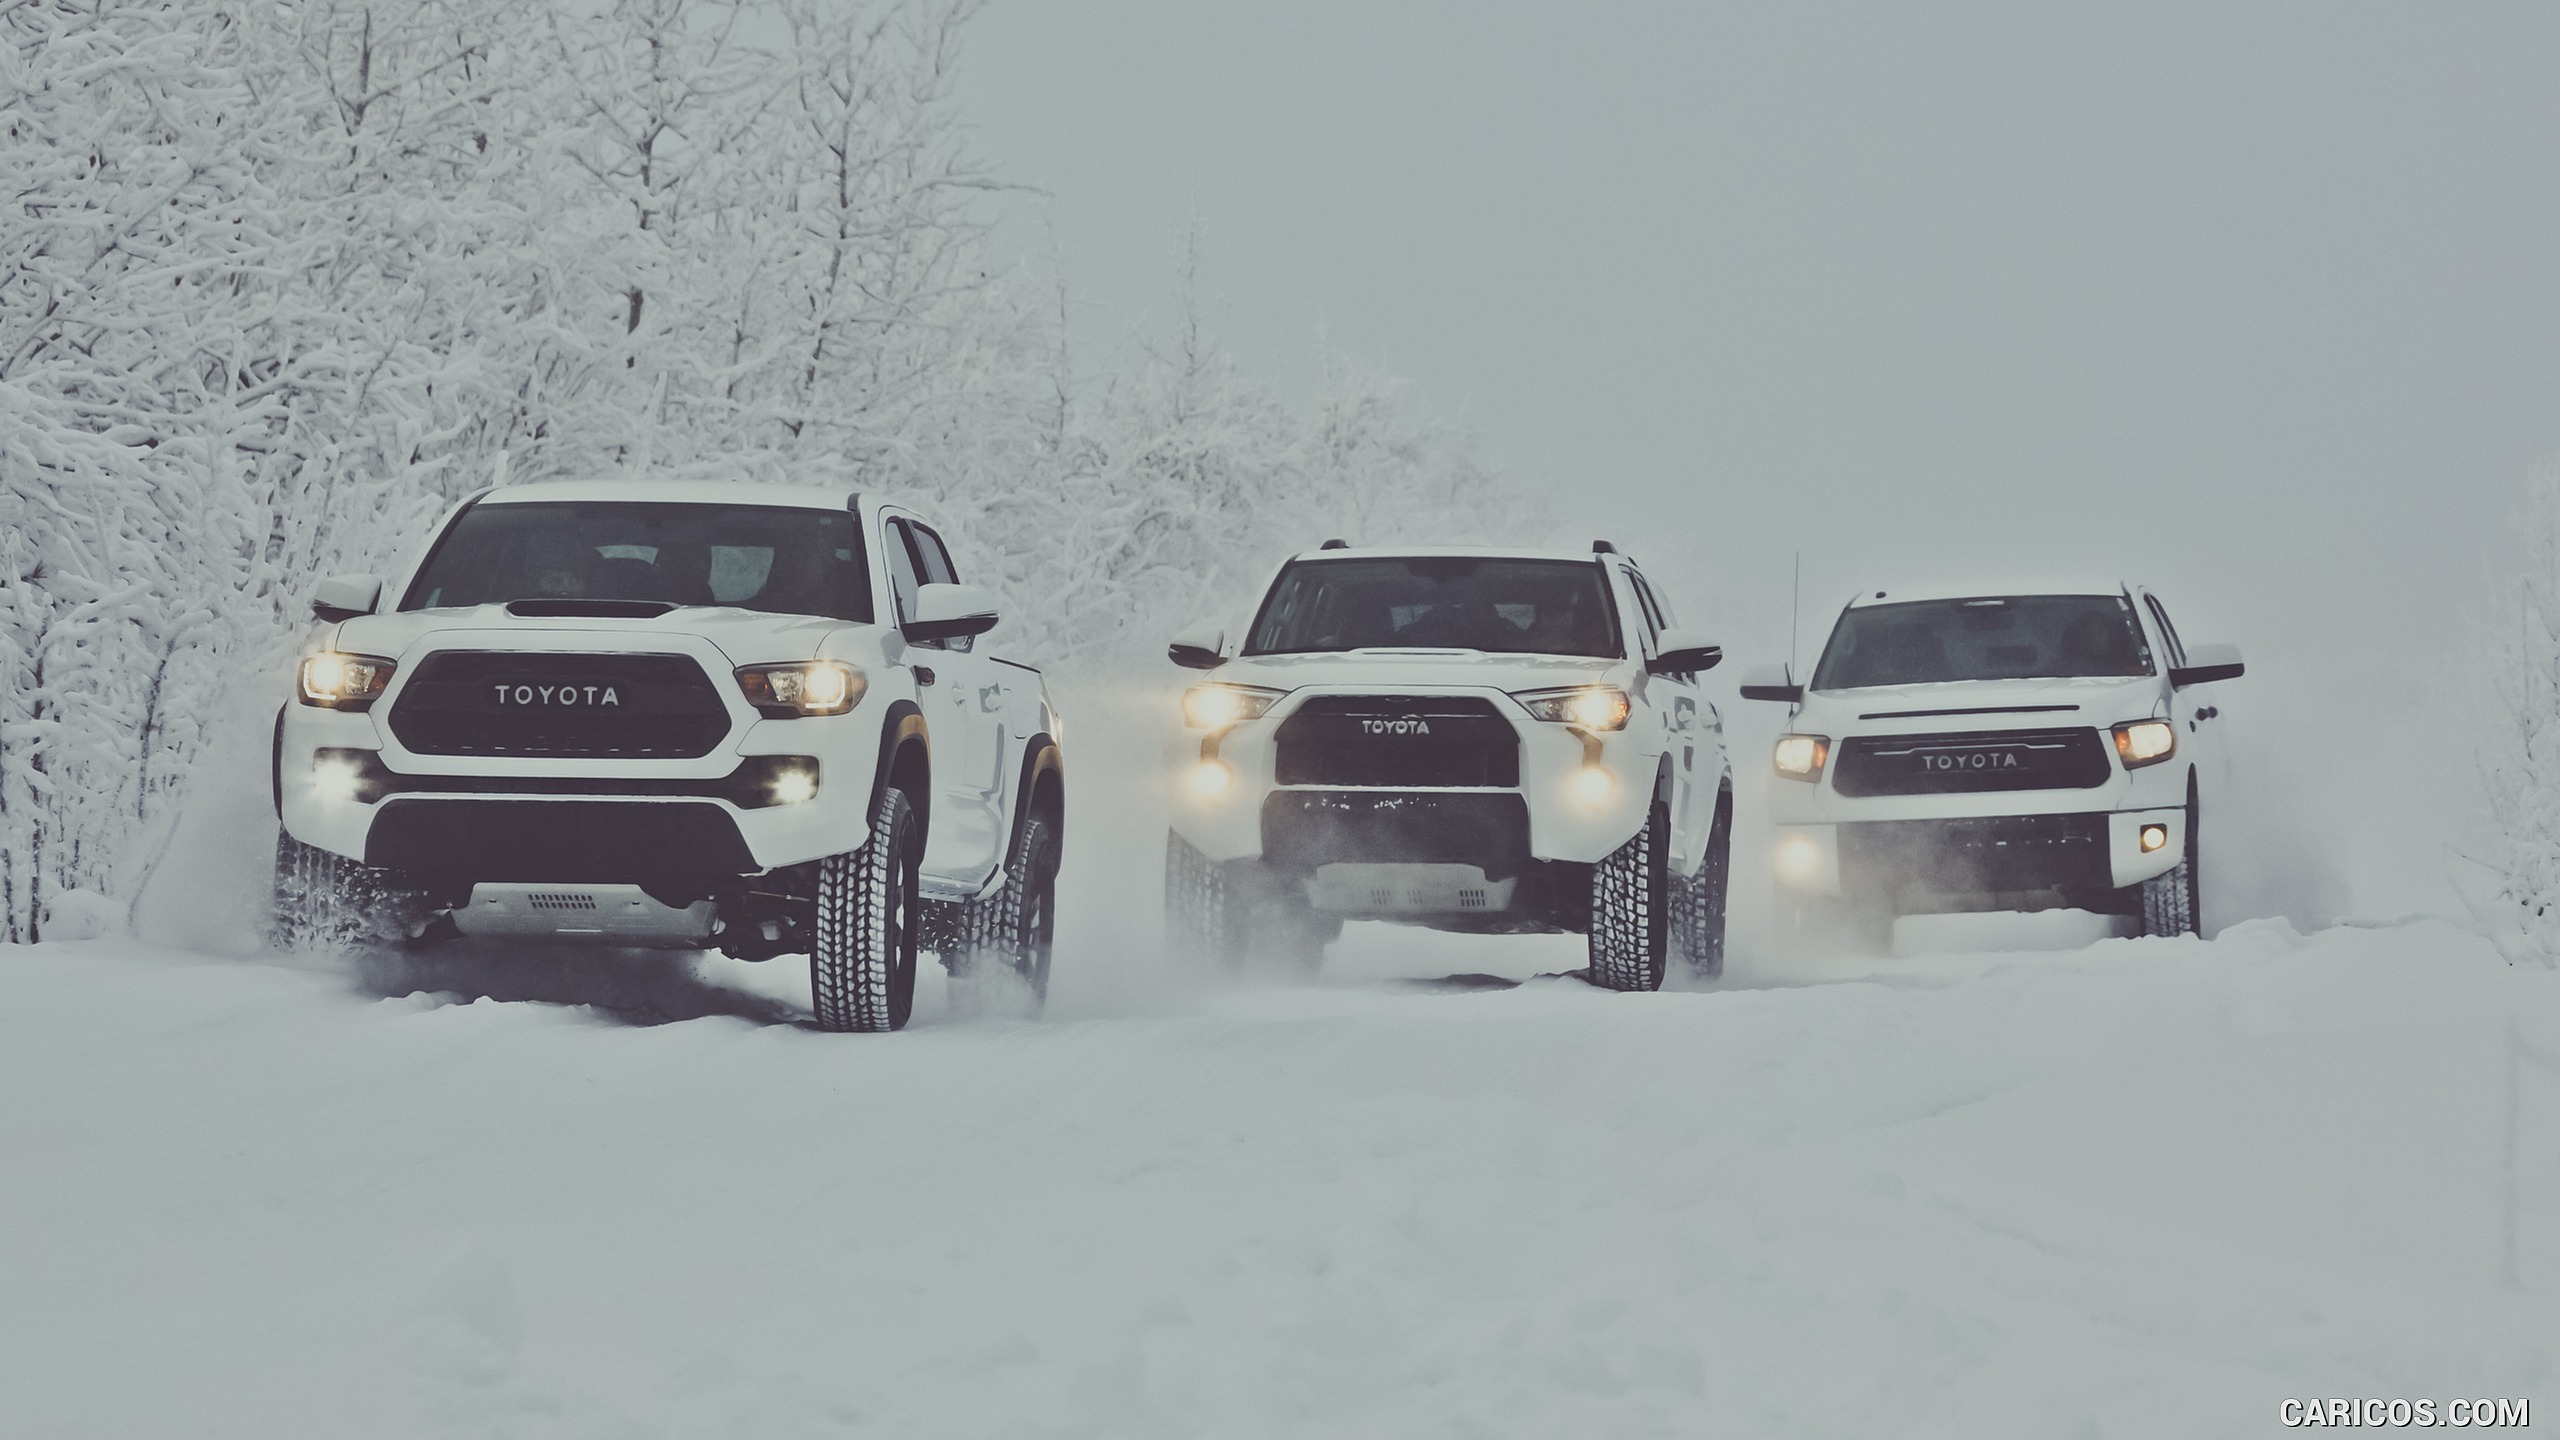 Toyota Taa Trd Pro In Snow Front Caricos